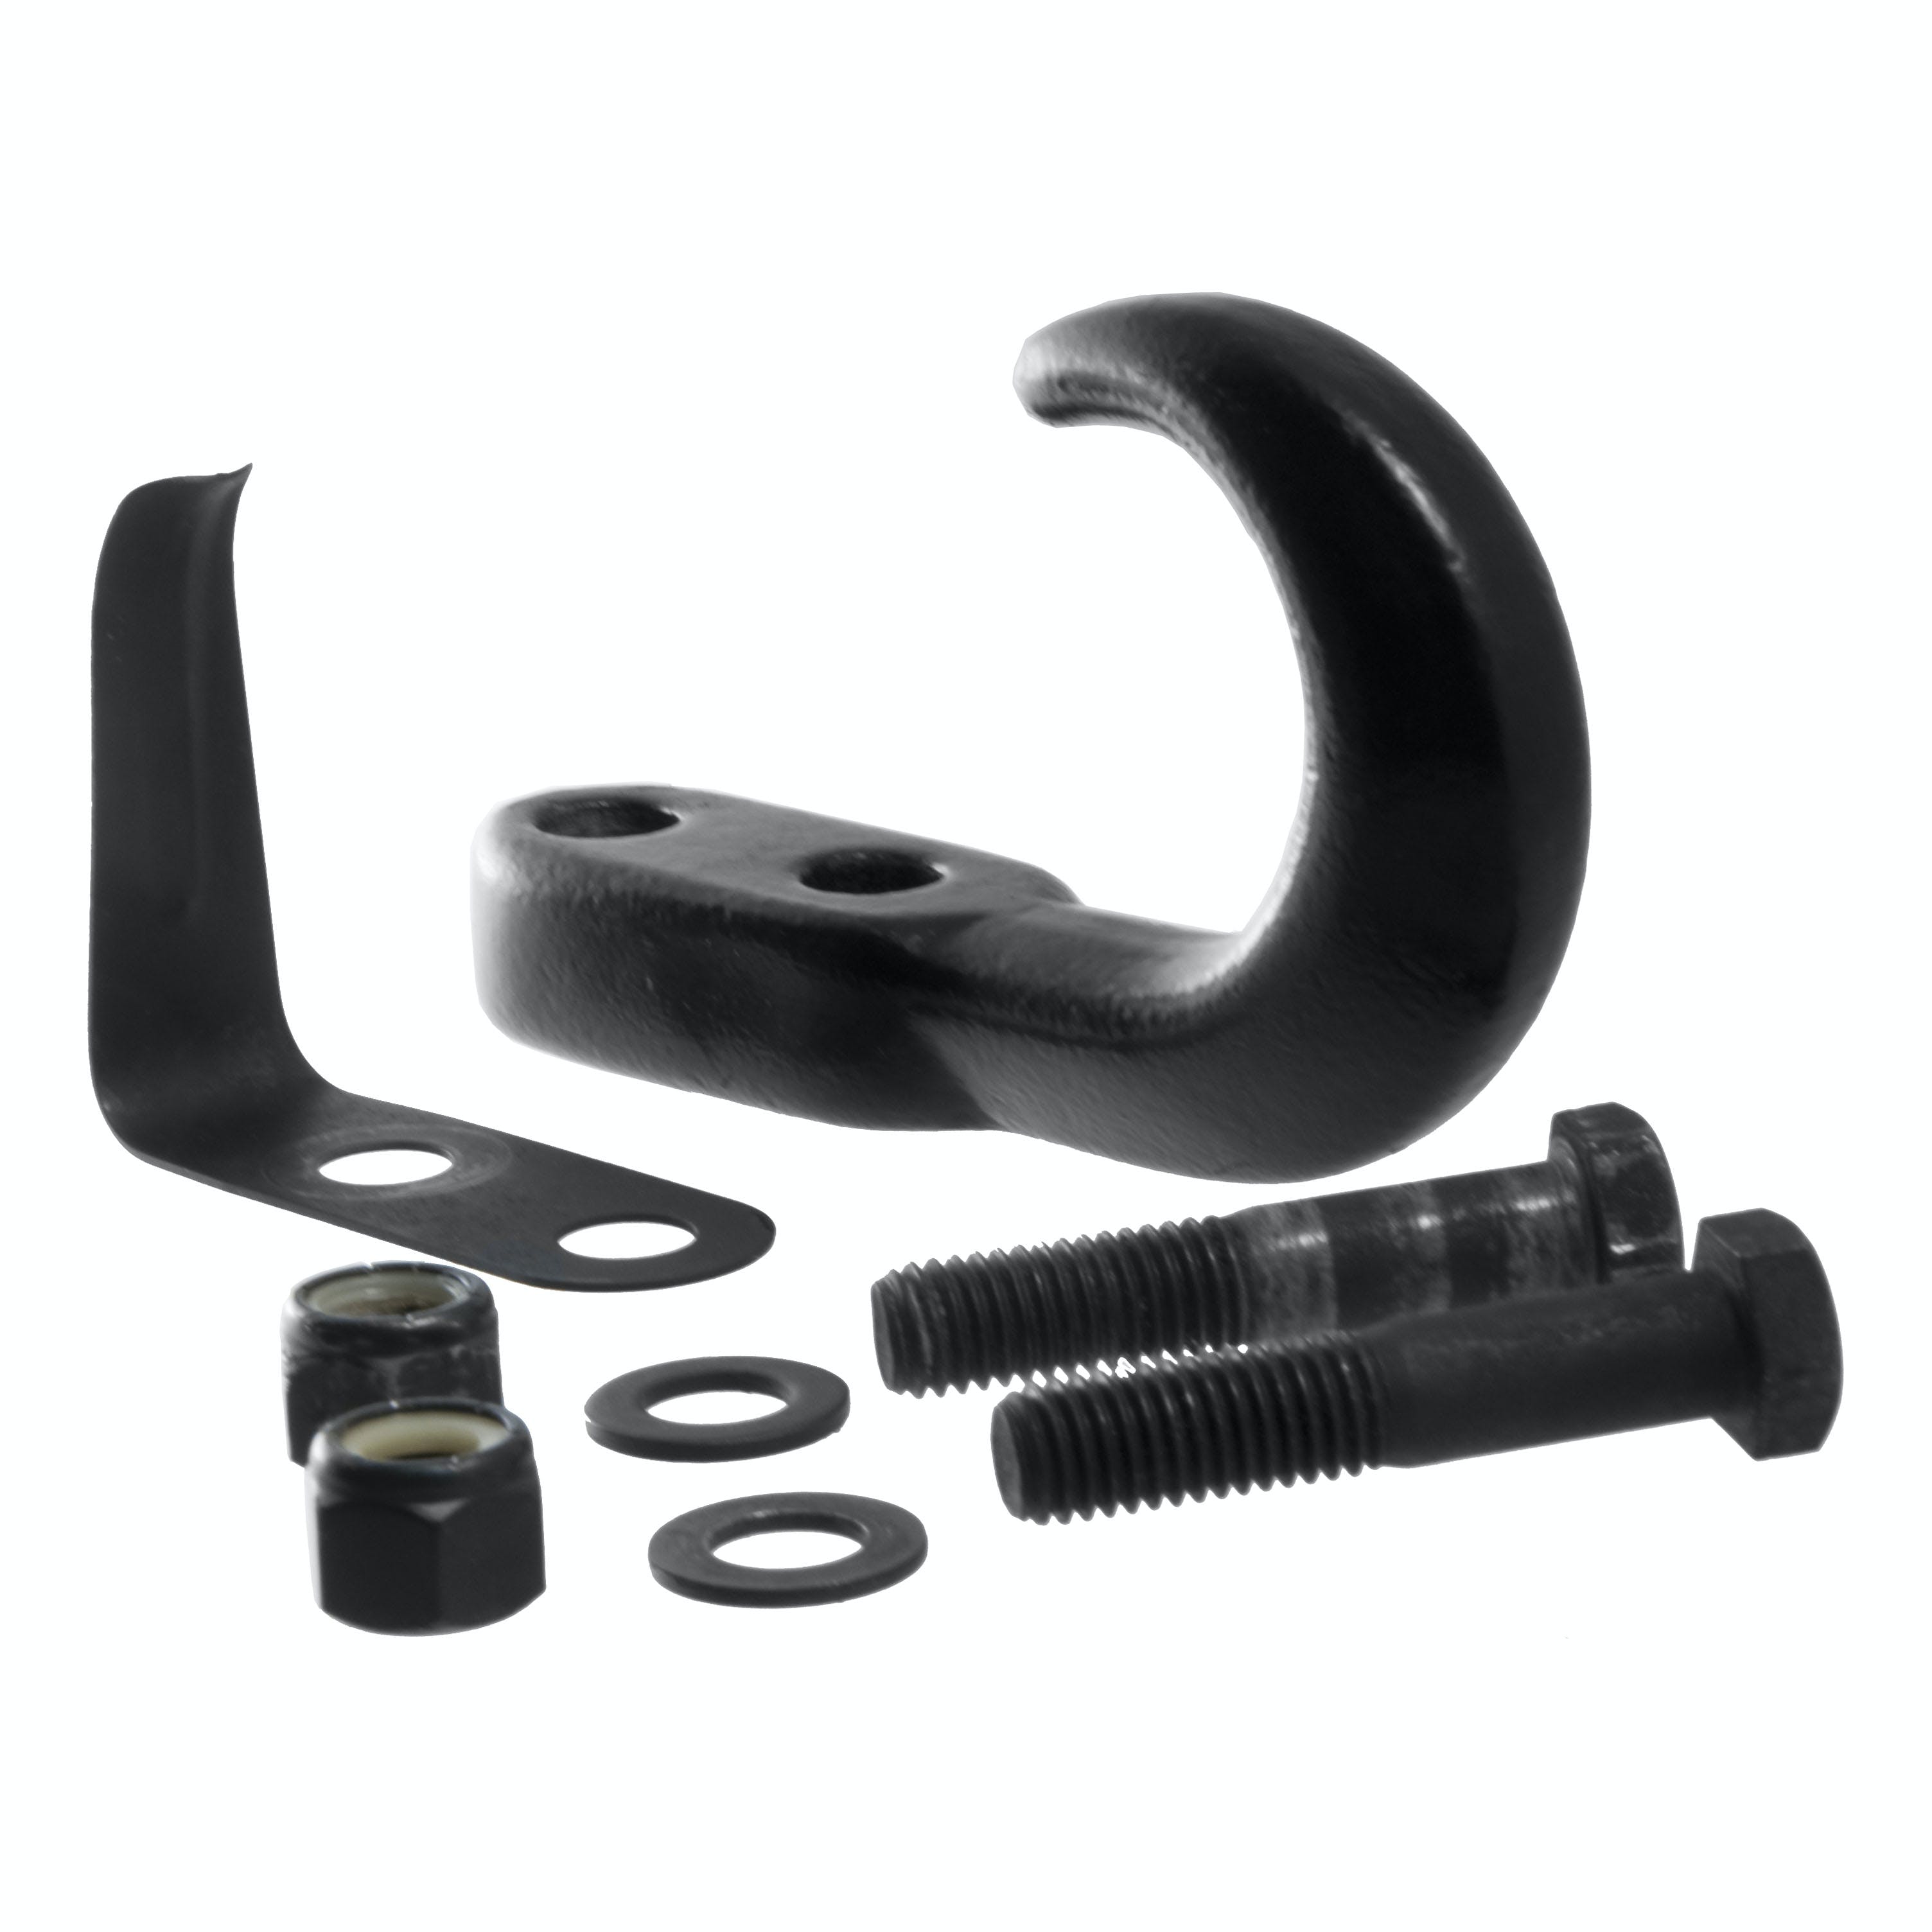 CURT 22411 Tow Hook with Hardware (10,000 lbs., Black)